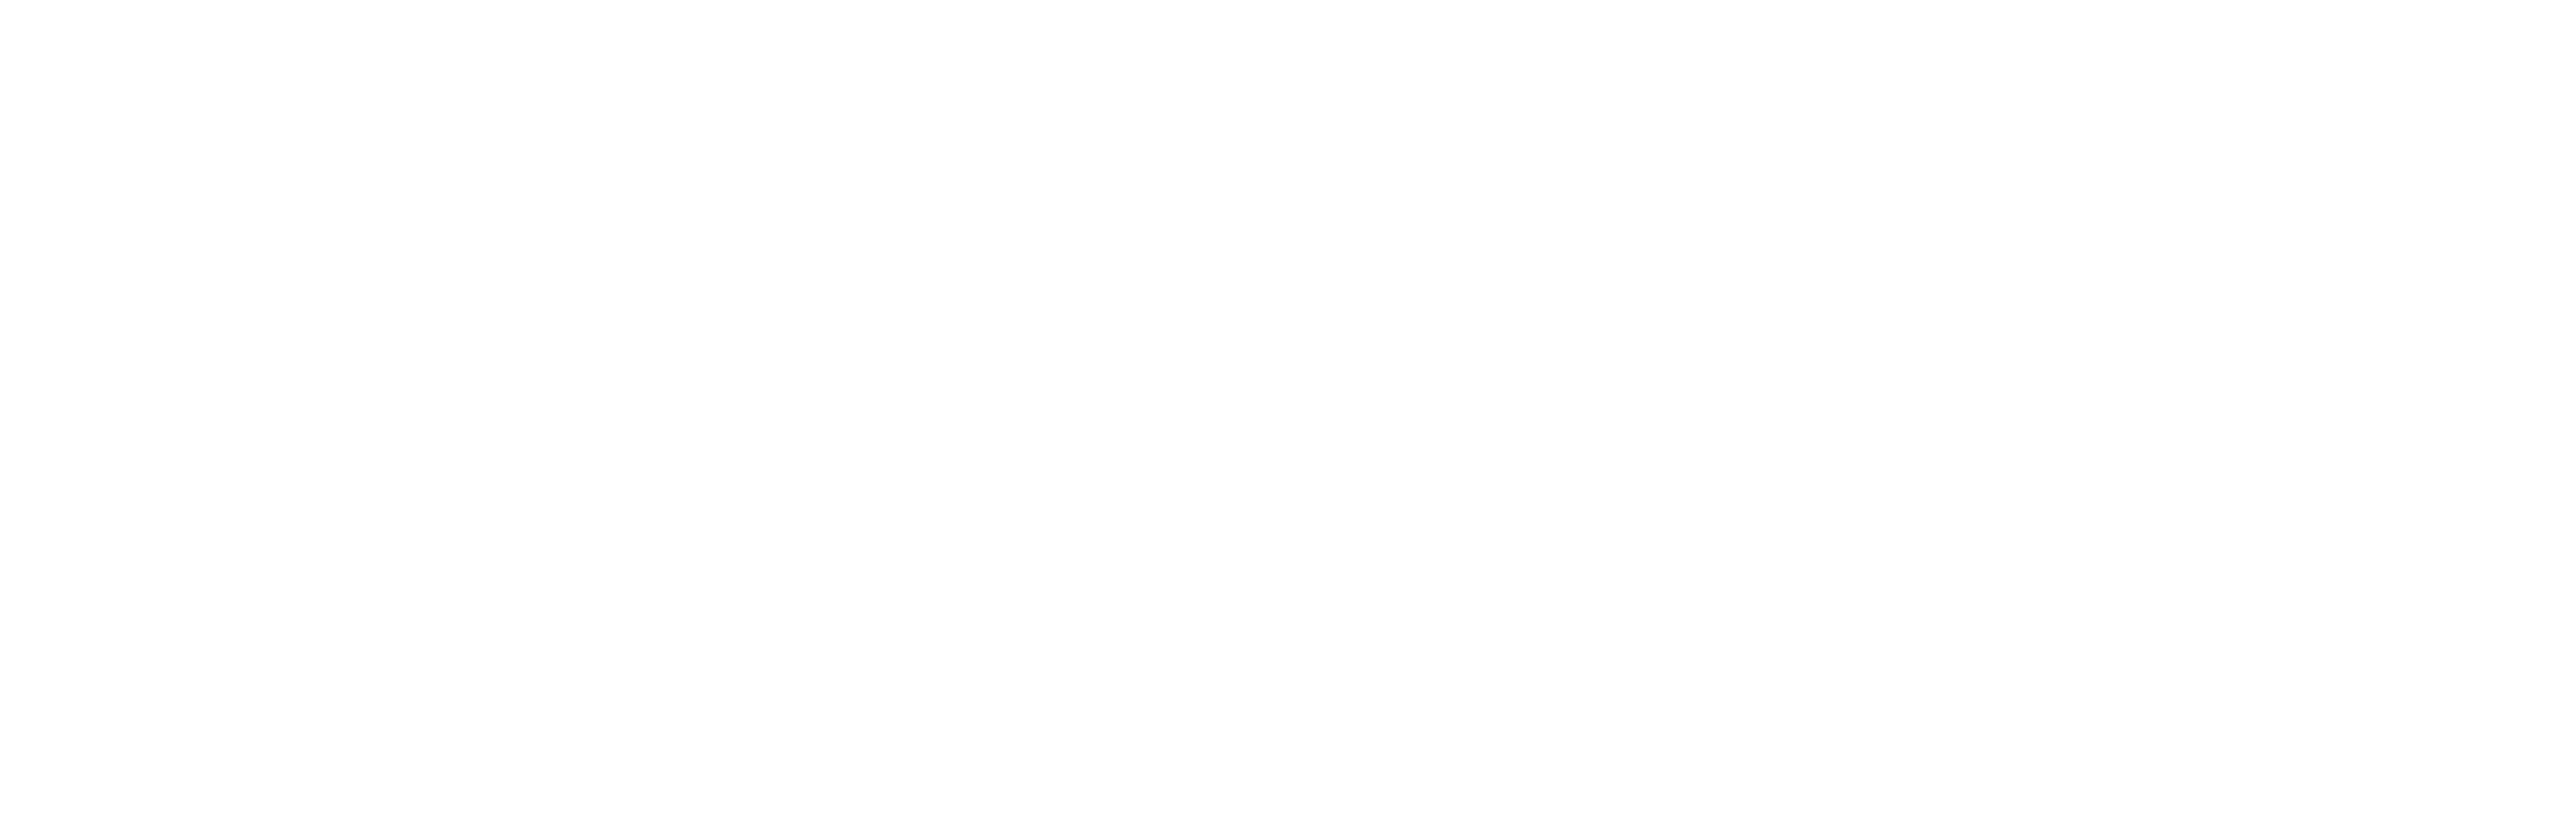 https://fishcare.org.au/wp-content/uploads/2020/08/Logo-whie-trans-11.png